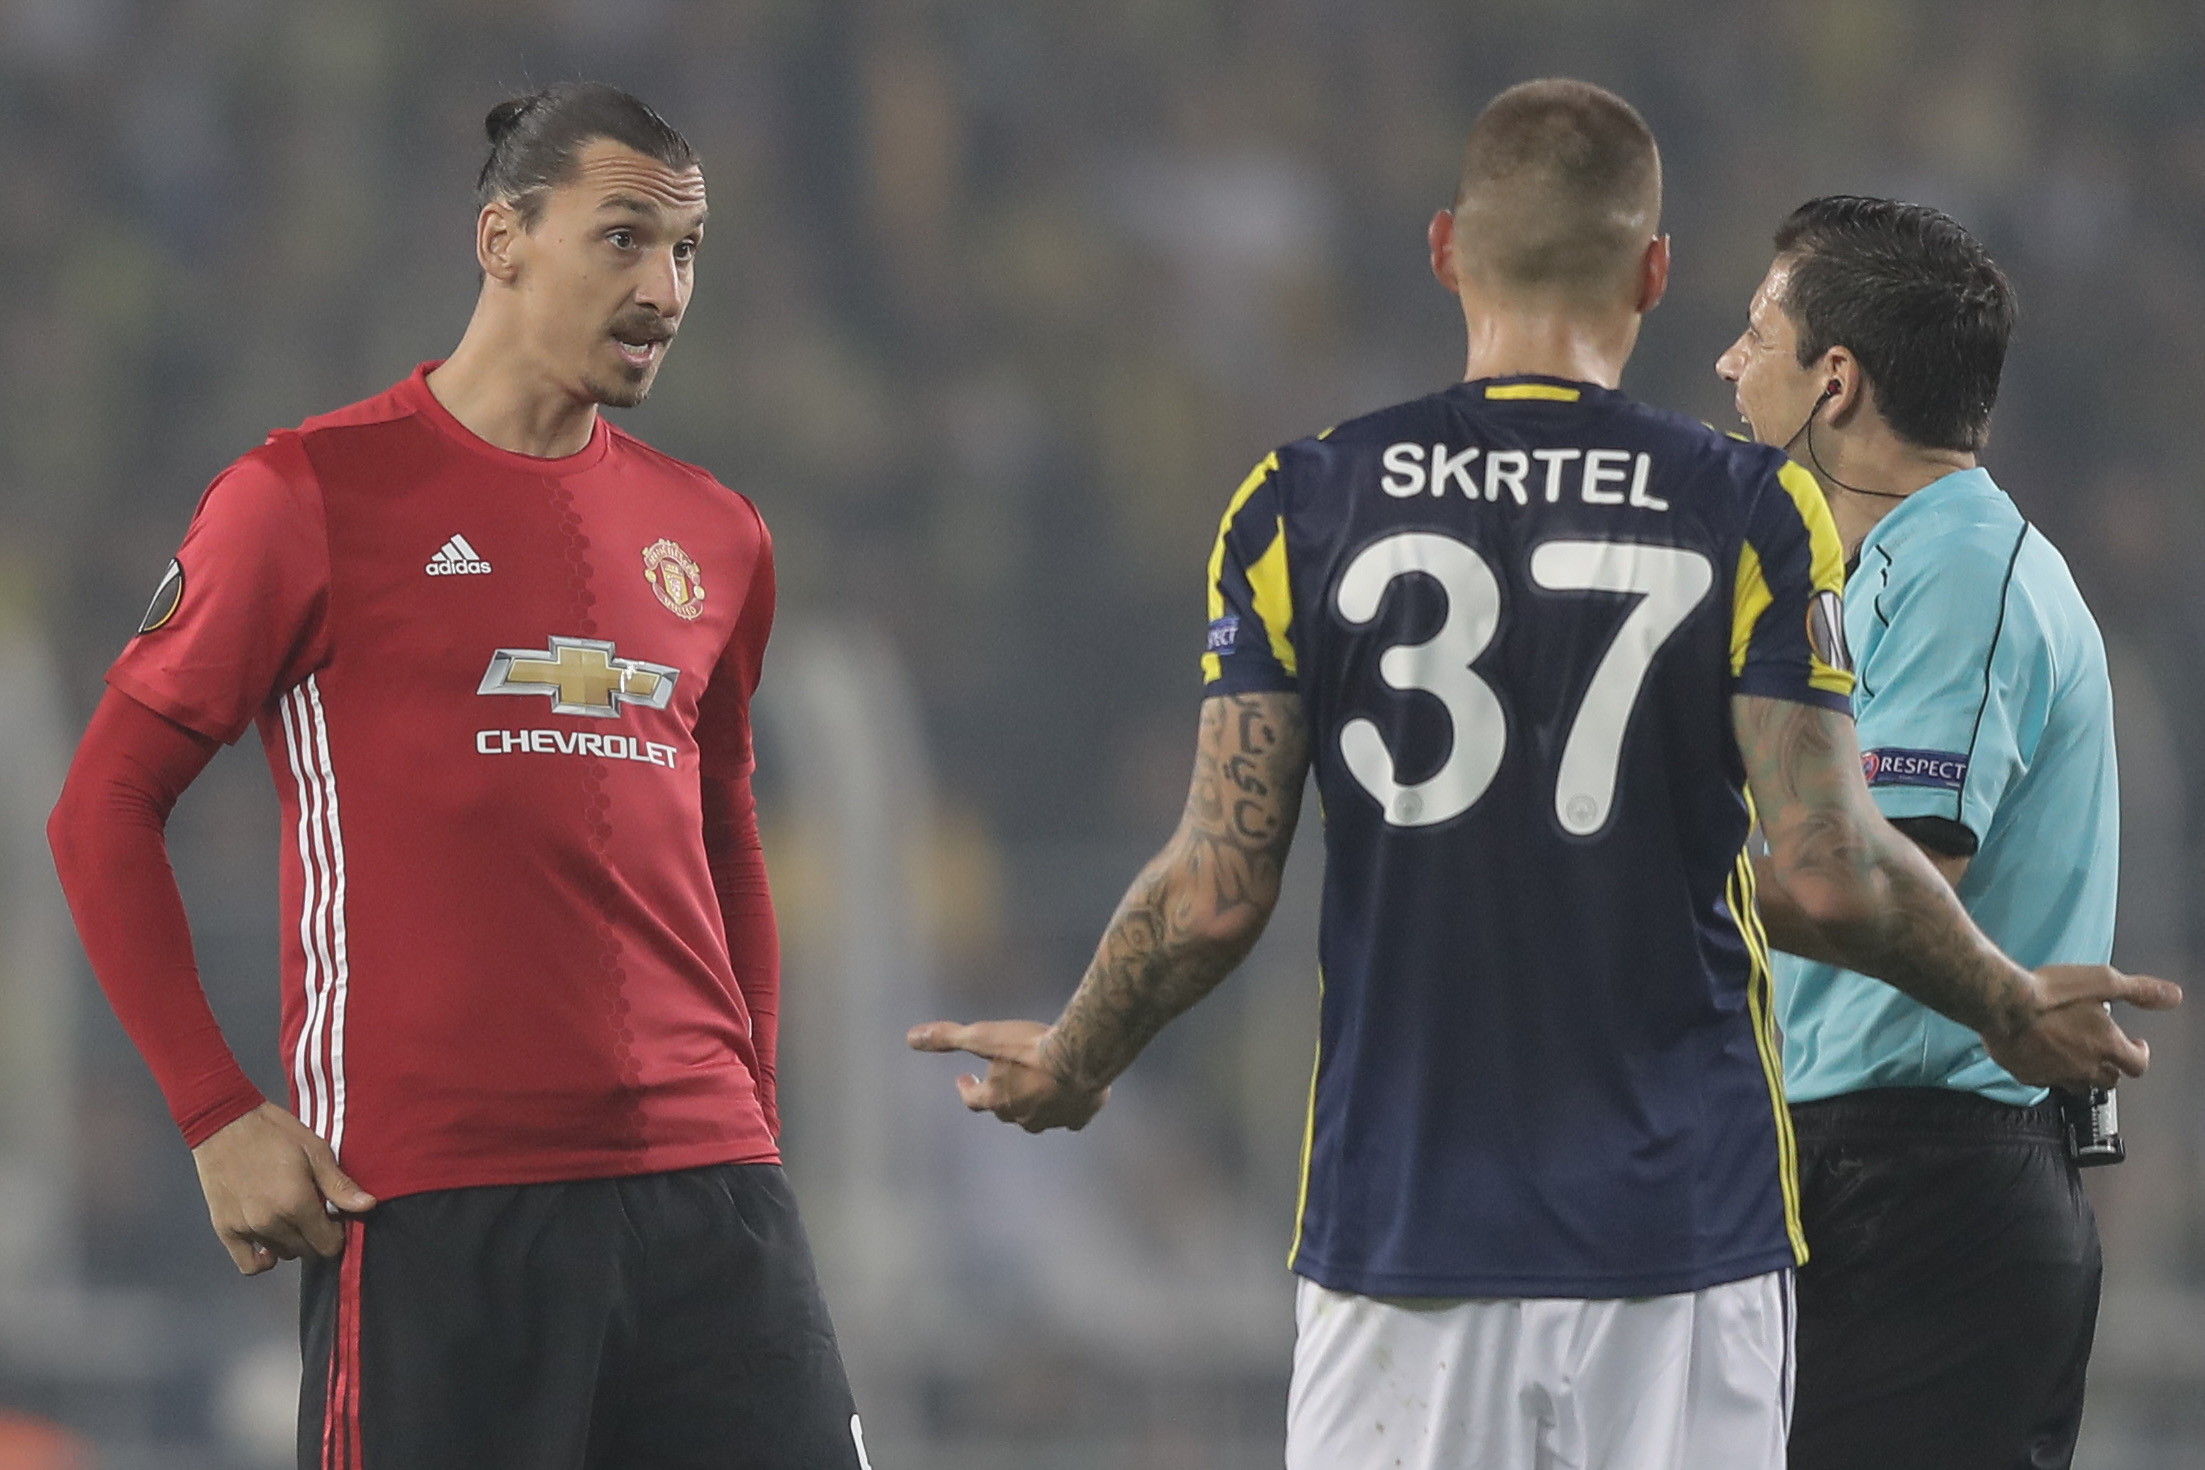 ISTANBUL, TURKEY - NOVEMBER 03: Zlatan Ibrahimovic of Manchester United and Martin Skrtel of Fenerbahce speak to the referee during the UEFA Europa League Group A match between Fenerbahce SK and Manchester United FC at Sukru Saracoglu Stadium on November 3, 2016 in Istanbul, Turkey.  (Photo by Chris McGrath/Getty Images)